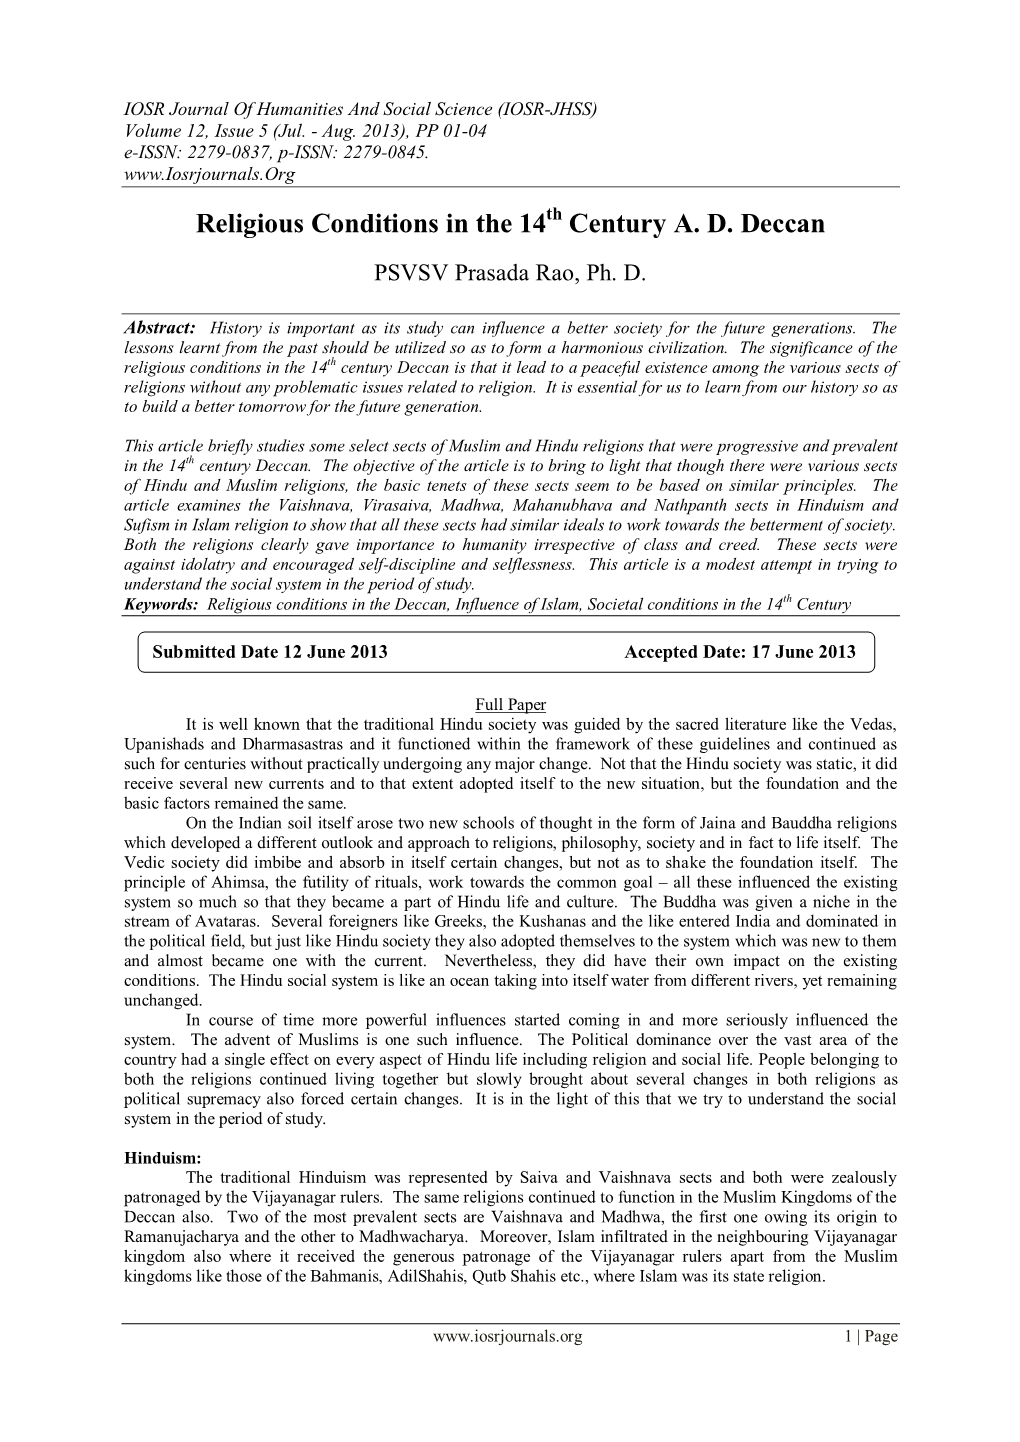 Religious Conditions in the 14 Century A. D. Deccan